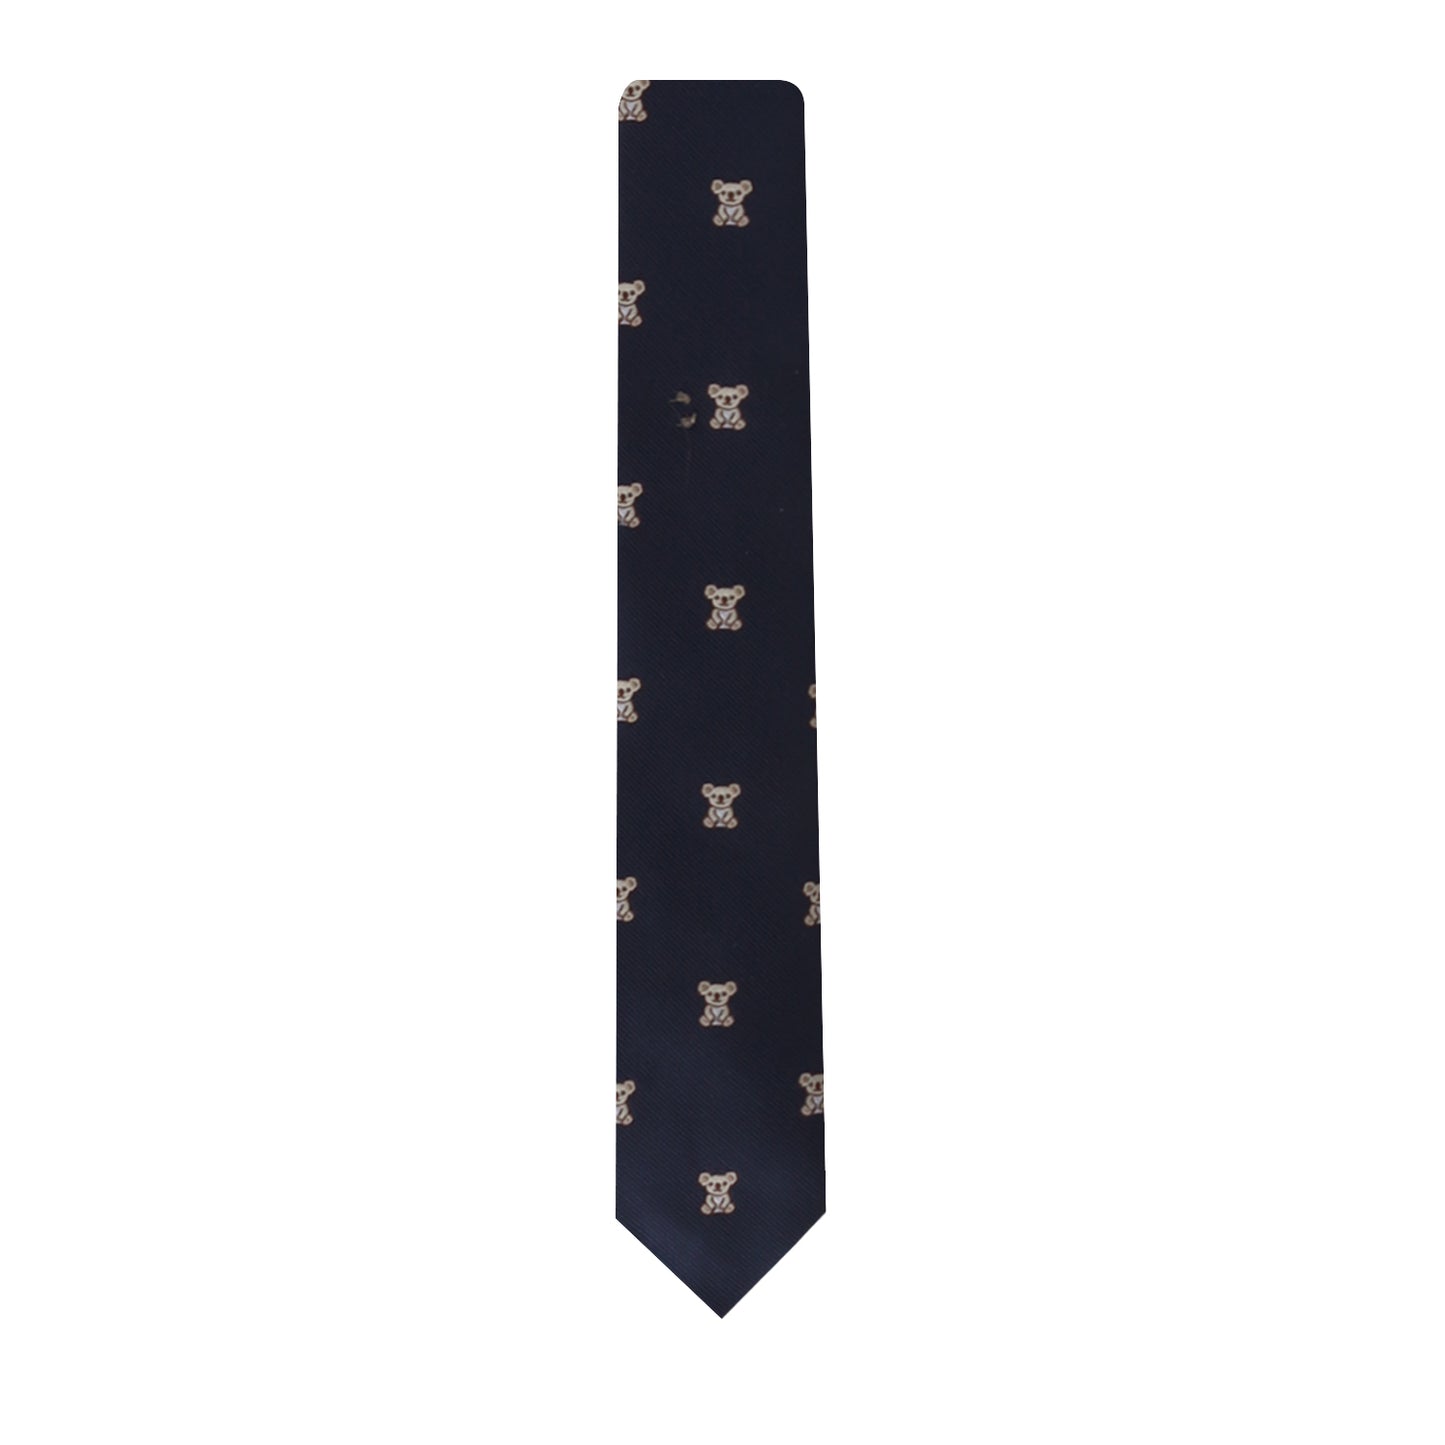 A dark blue Koala Skinny Tie featuring a repeating pattern of small, cuddly brown teddy bears.